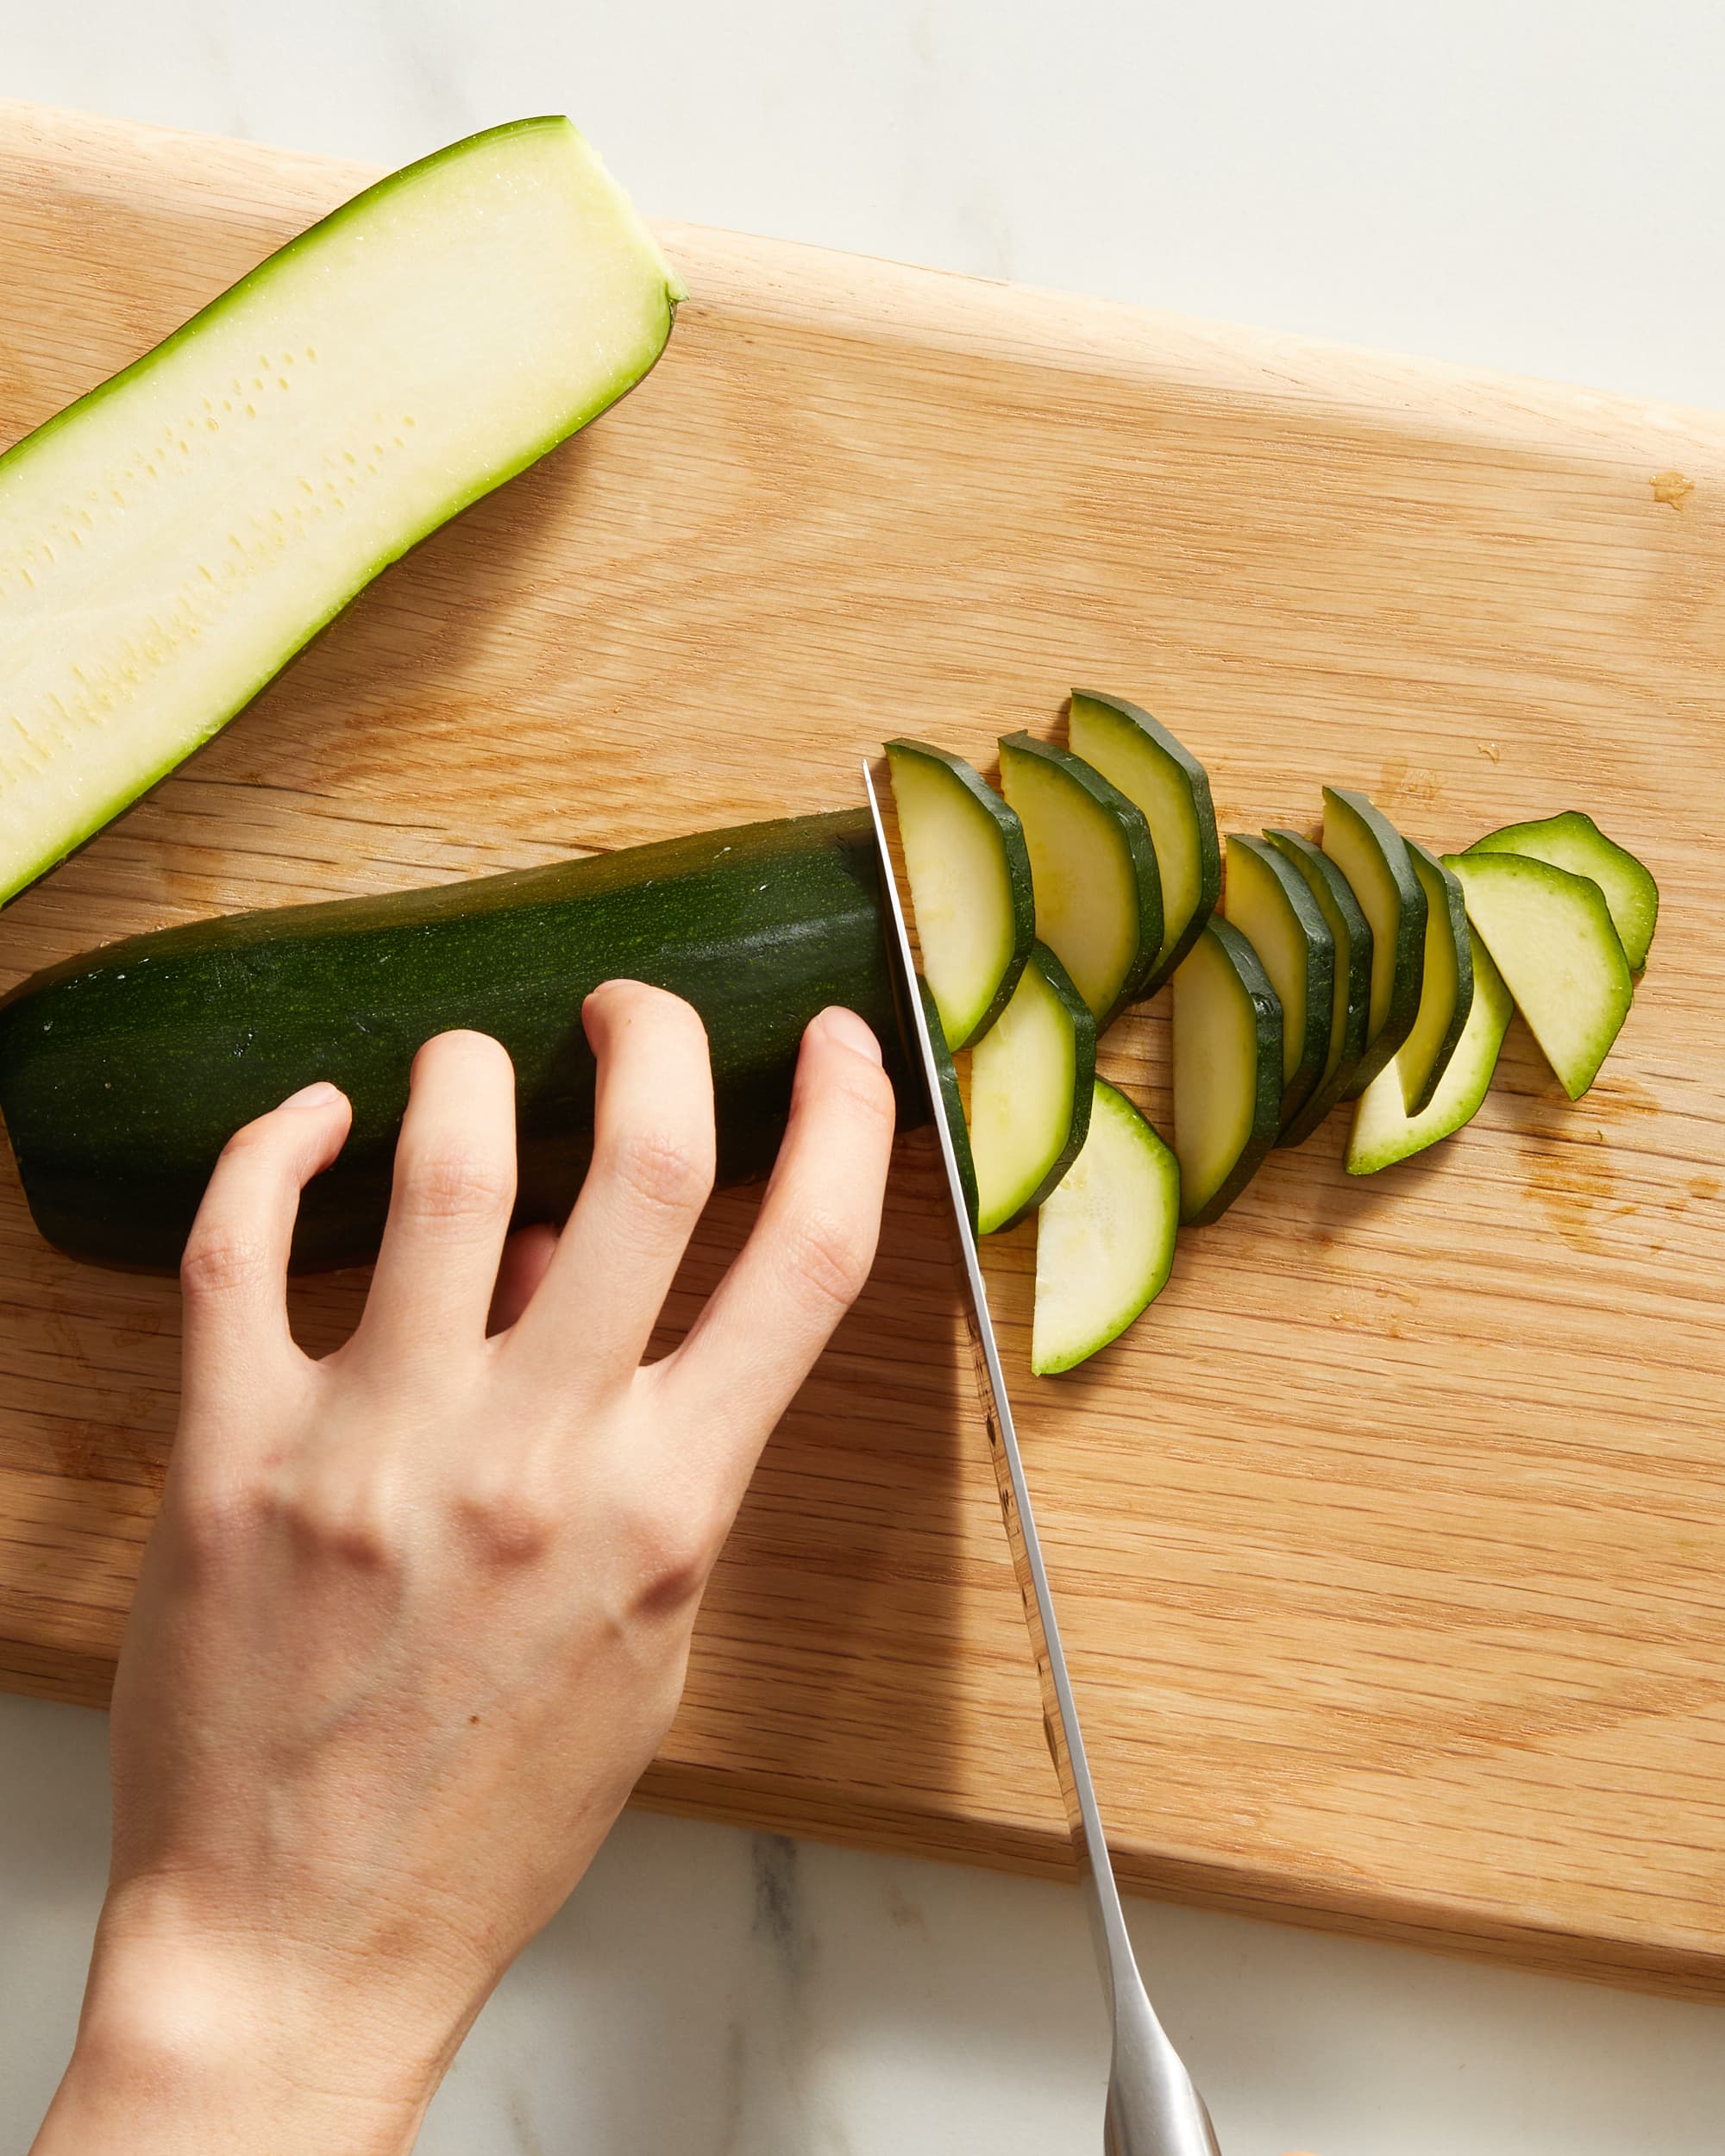 How To Cut Zucchini (6 Ways with Step-by-Step Photos)